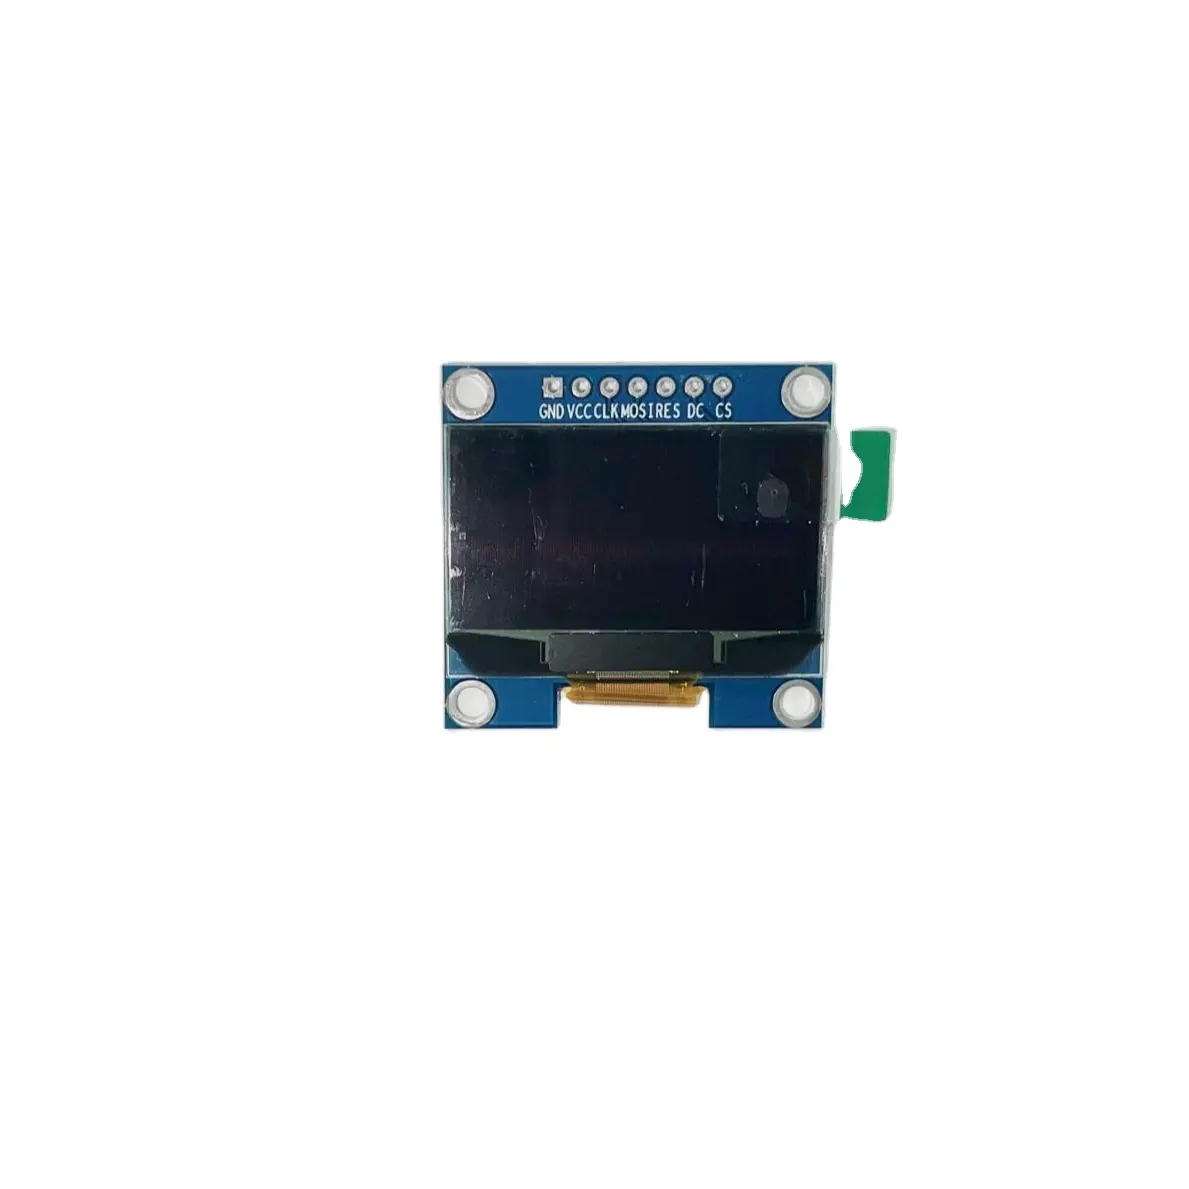 1.3" inch SSD1306 128*64 OLED Module for arduino